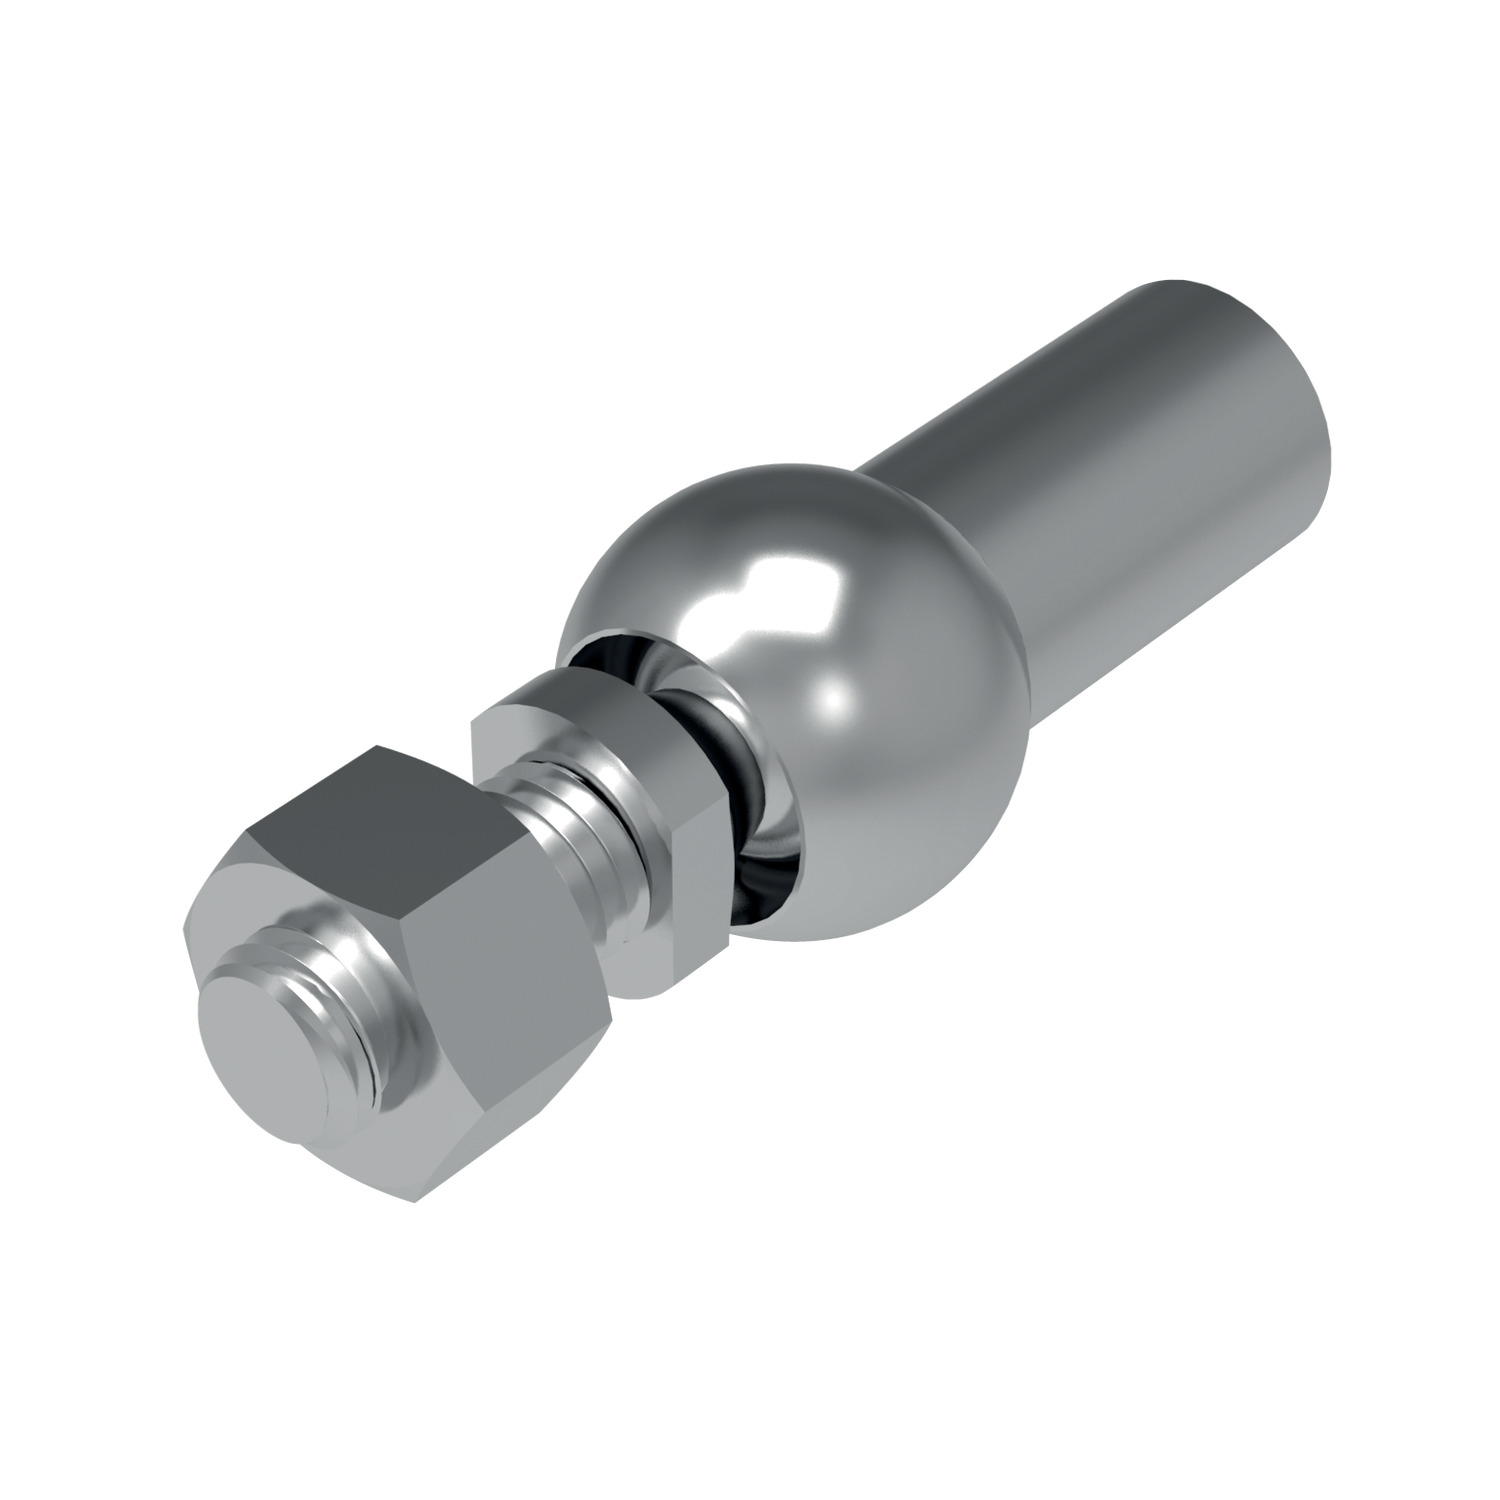 Product R3506, Stainless Axial Ball and Socket Joints  / 